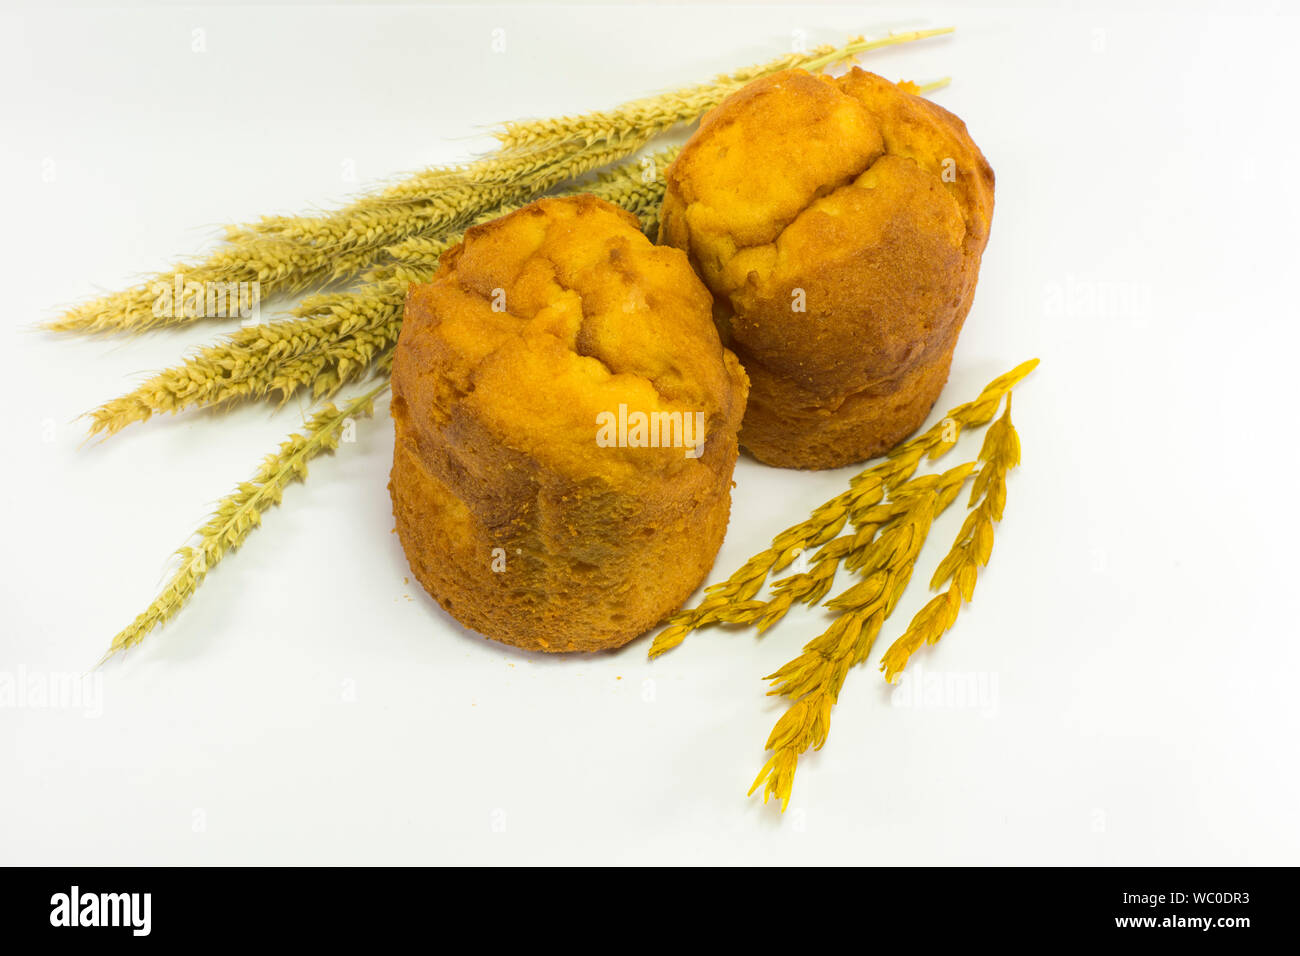 High Angle View Of Muffins With Wholegrain On White Background Stock Photo